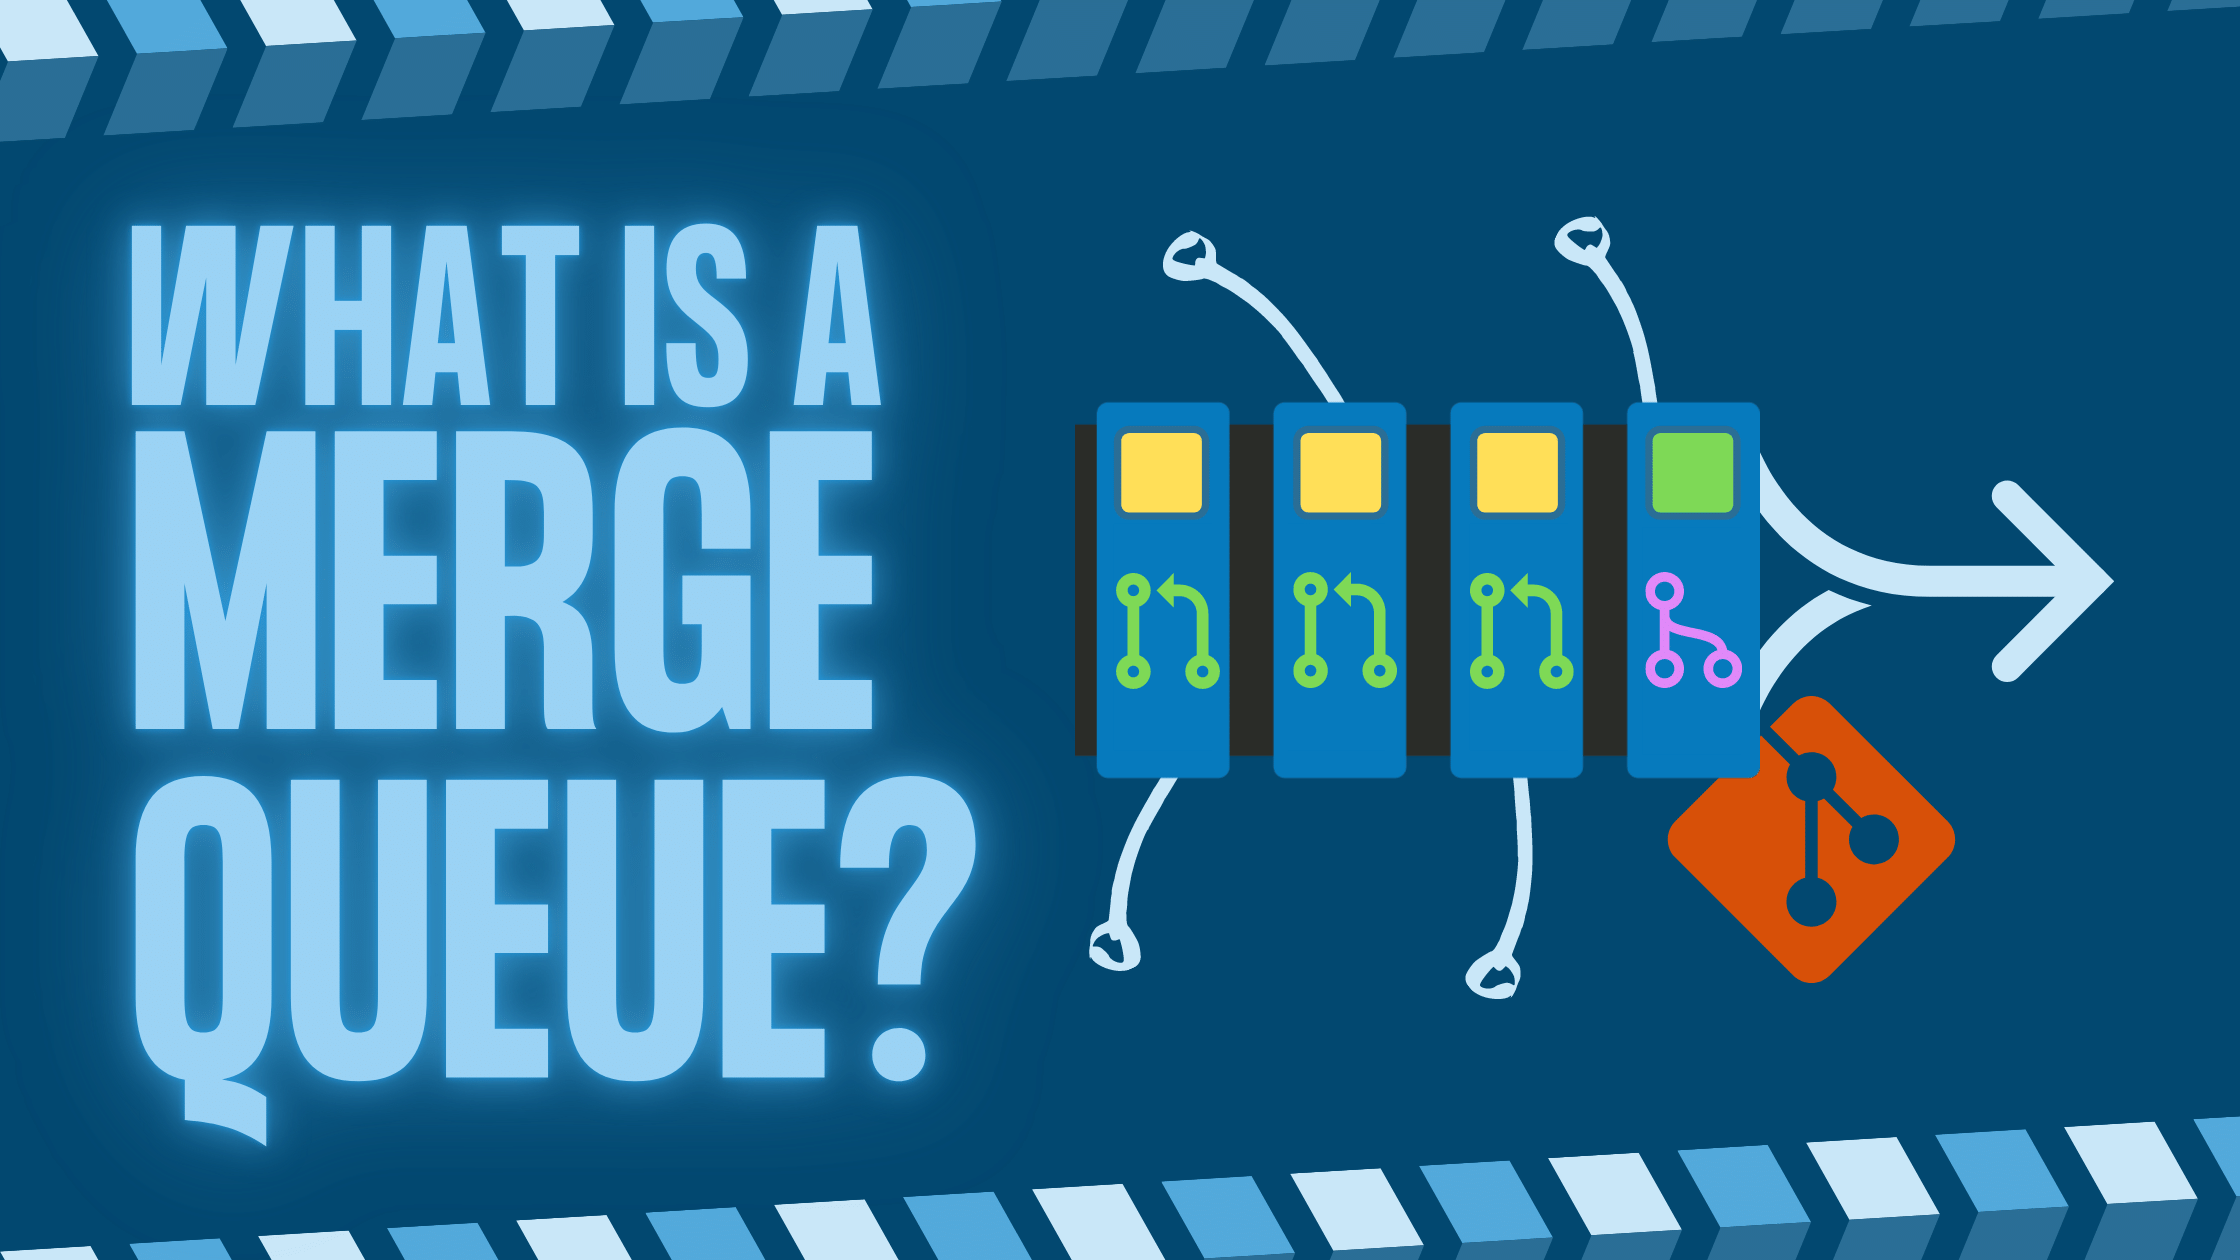 What is a Merge Queue?